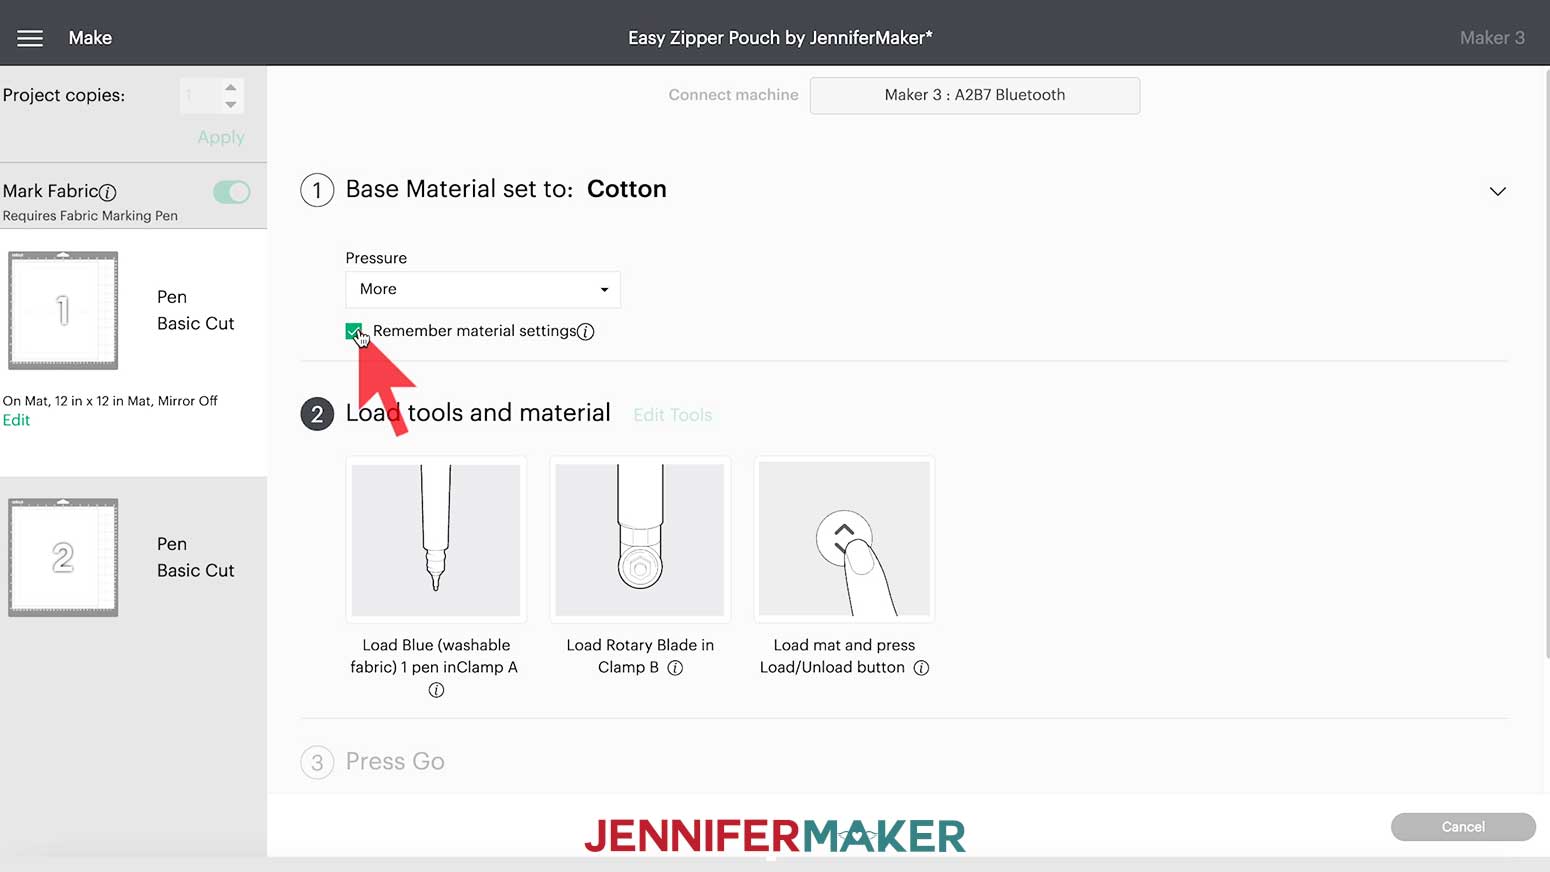 Check box to remember material setting for my easy zipper pouch